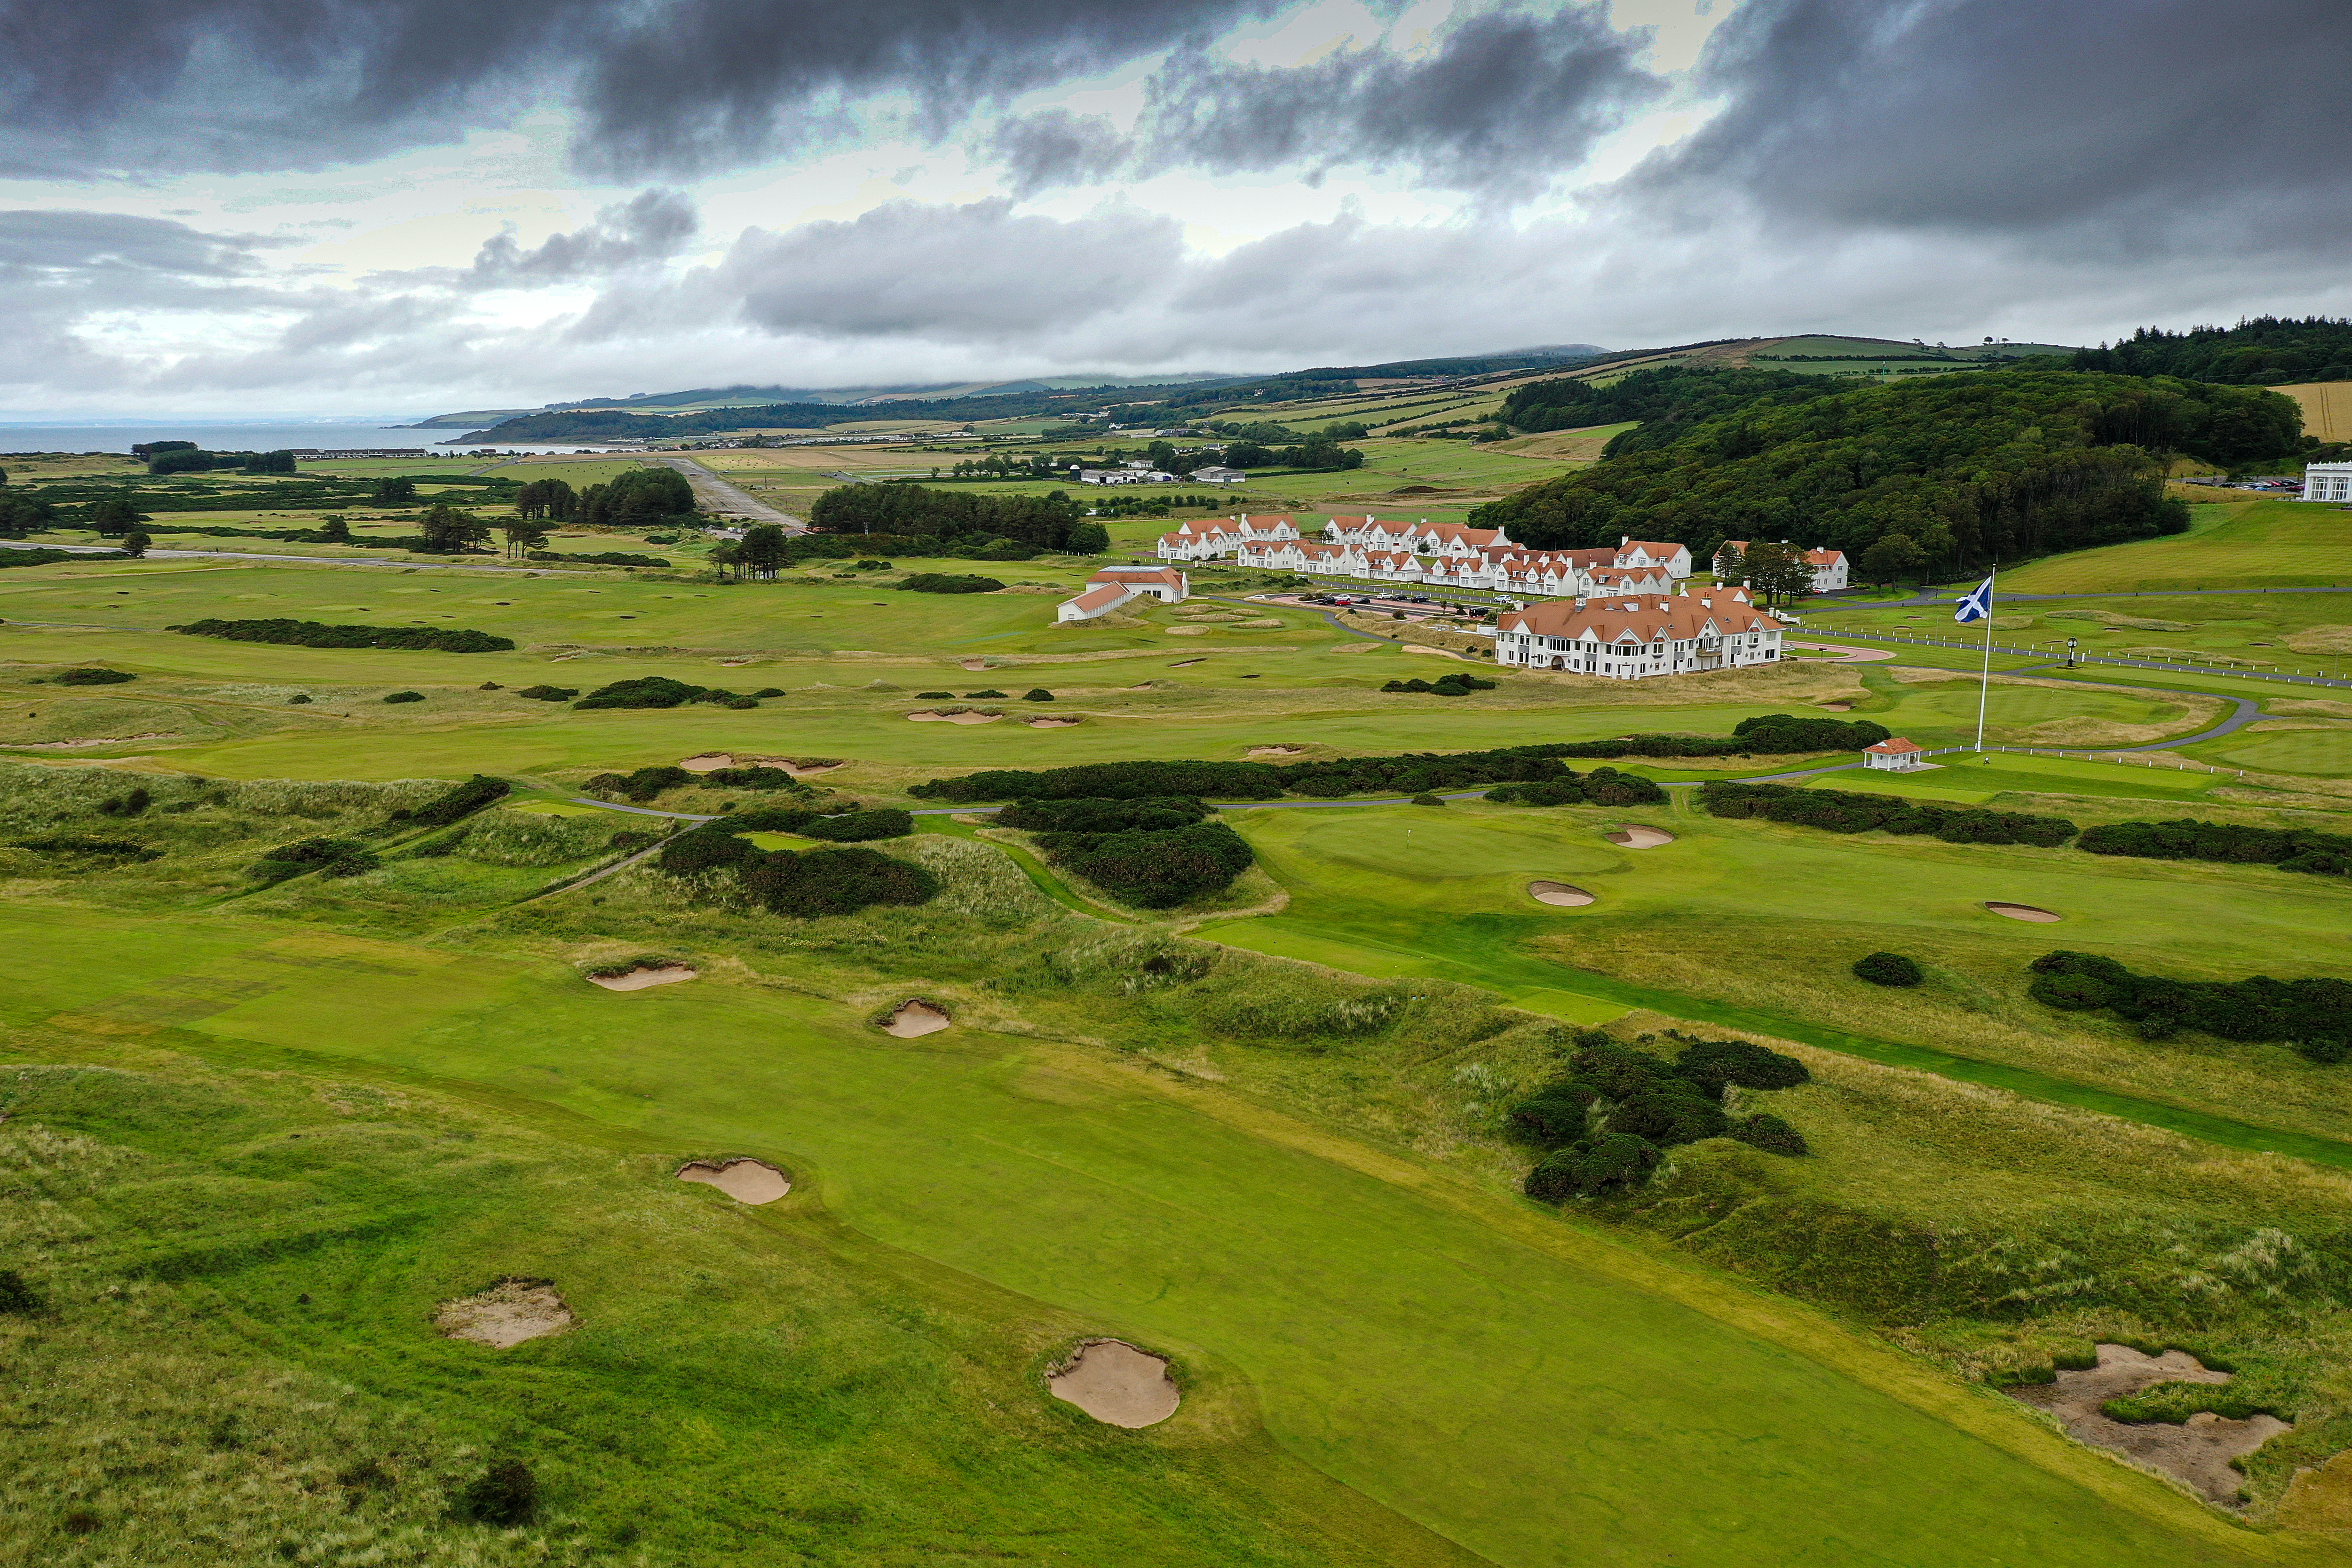 A general view of Trump Hotel and golf course on June 14, 2020 in Turnberry, Scotland. (Photo: Jeff J Mitchell/Getty Images)